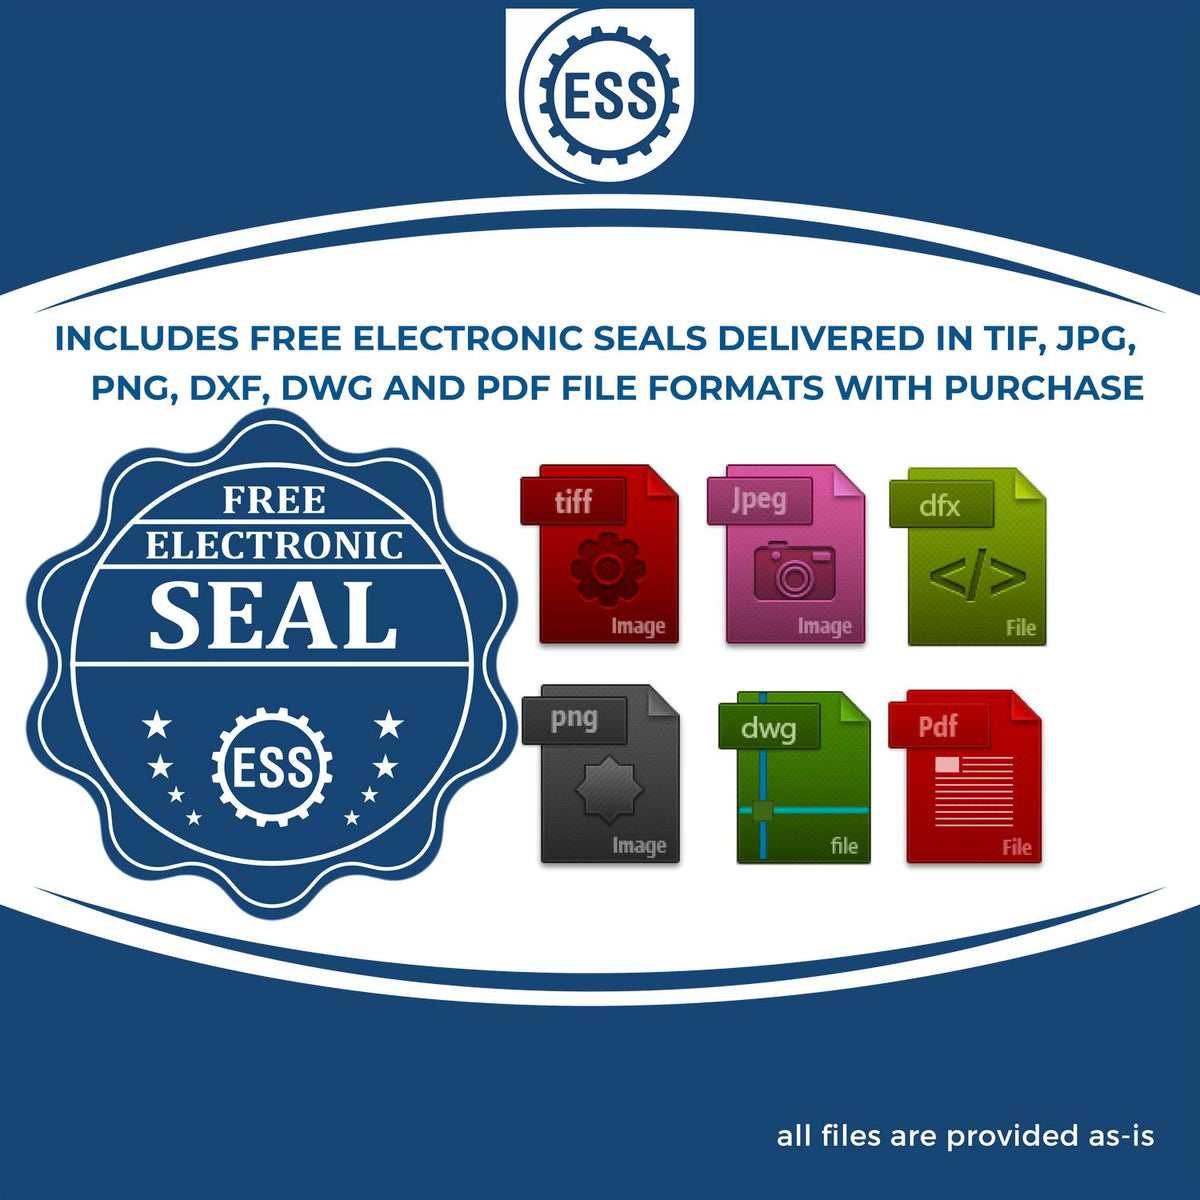 An infographic for the free electronic seal for the Gift New Mexico Engineer Seal illustrating the different file type icons such as DXF, DWG, TIF, JPG and PNG.